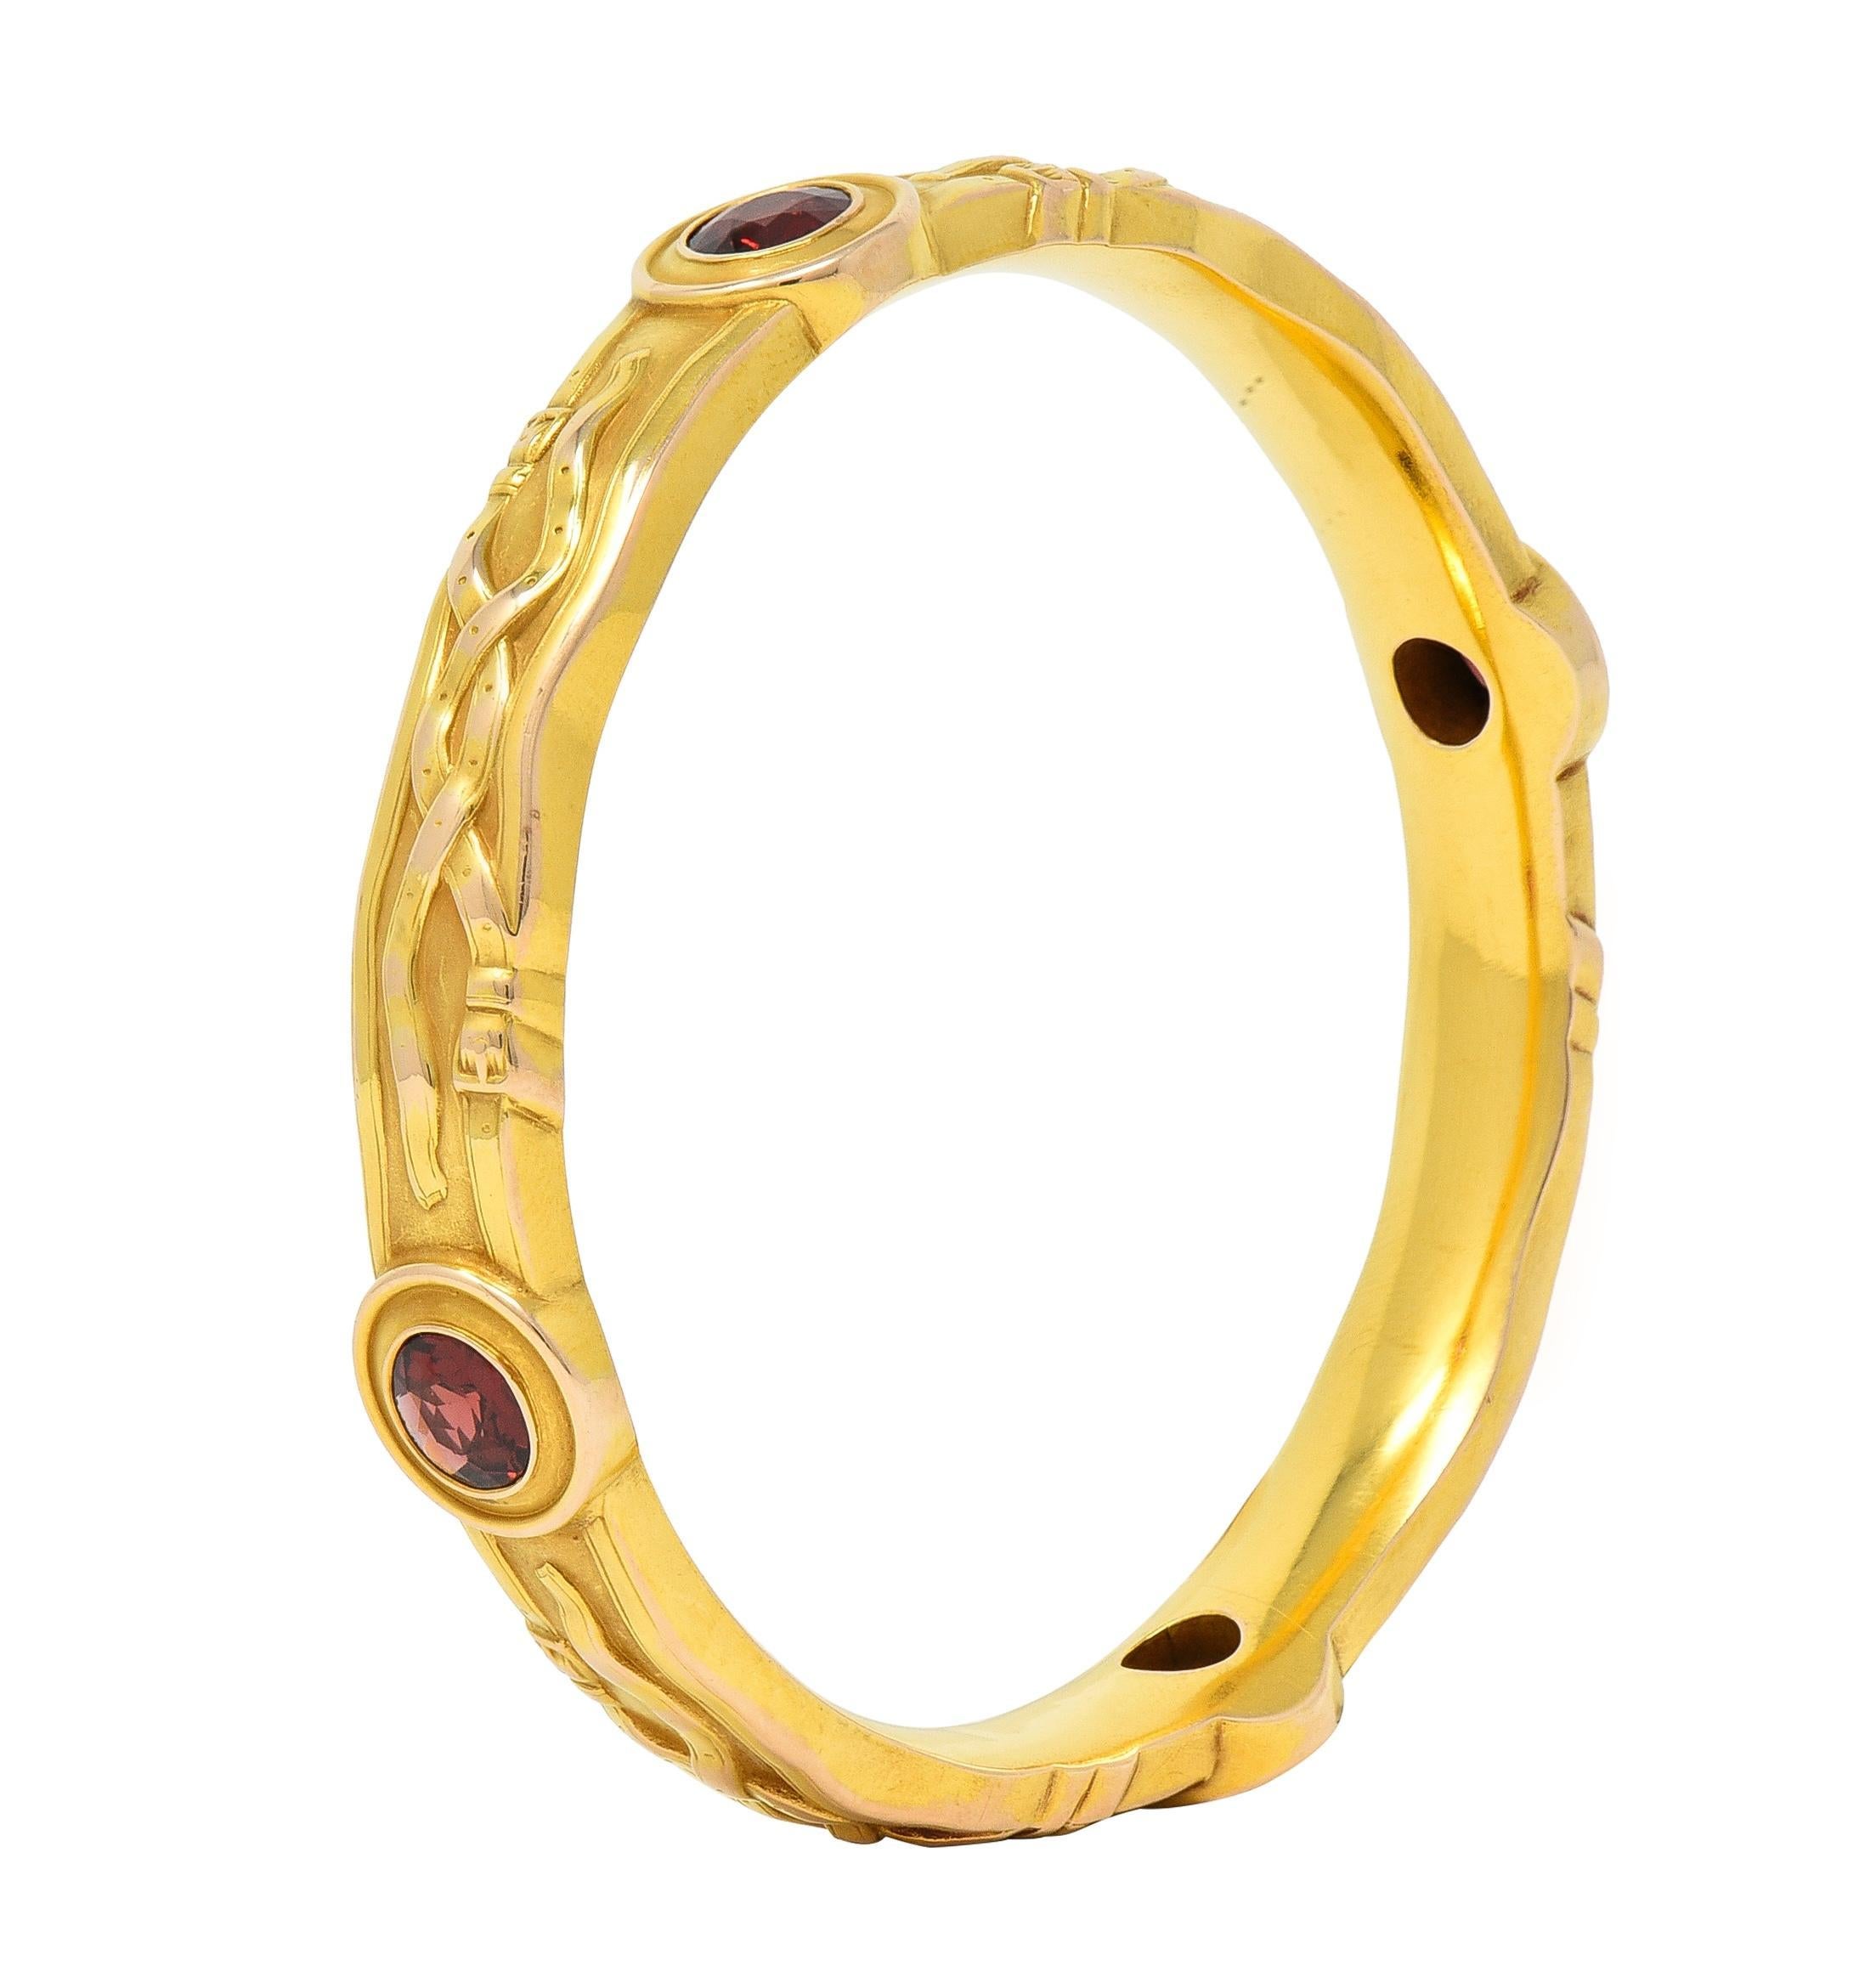 Designed as a wavy edged bangle bracelet featuring four oval stations, each bezel set by a round cut garnet, dark saturated red in color
Decorated throughout by raised stylized belts and buckles
With maker's mark for Riker Brothers and stamped 14k